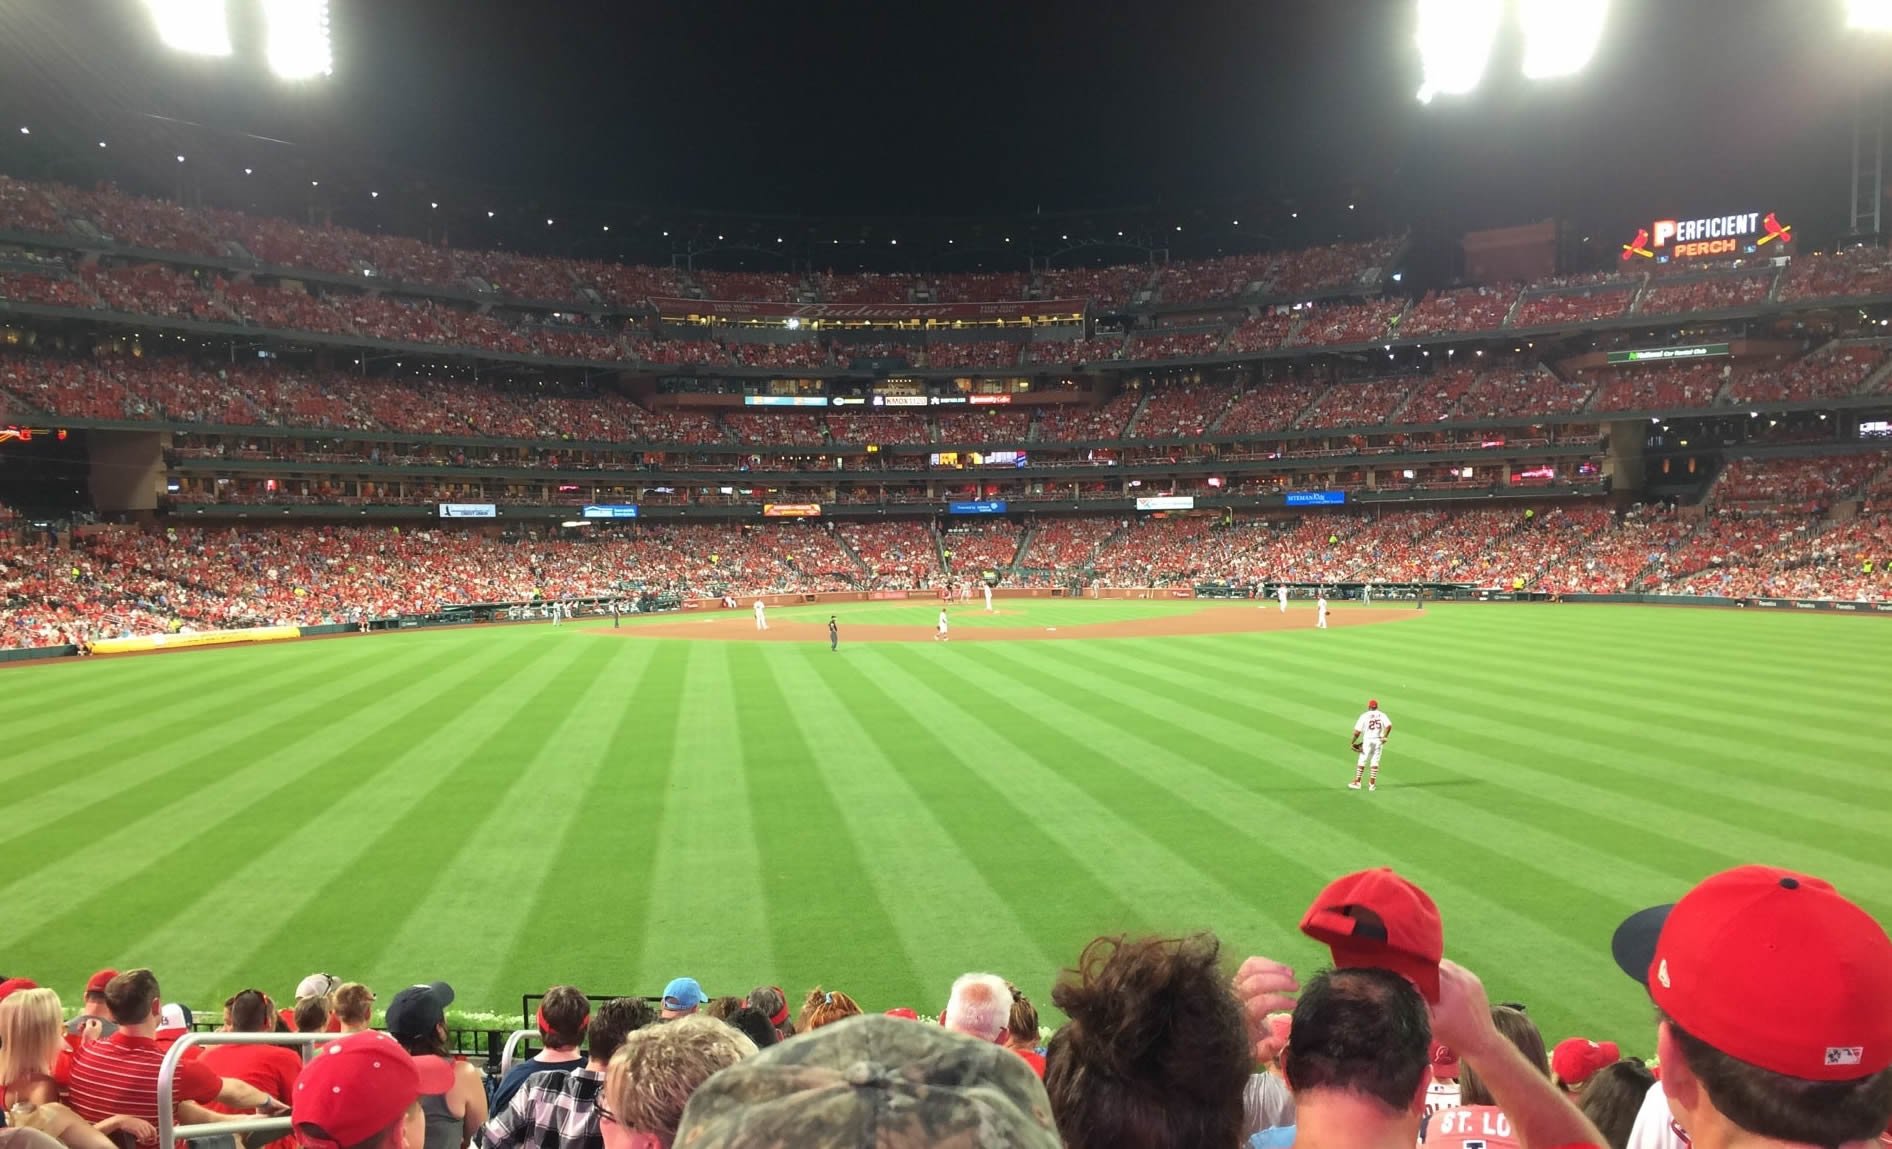 section 101, row 12 seat view  - busch stadium